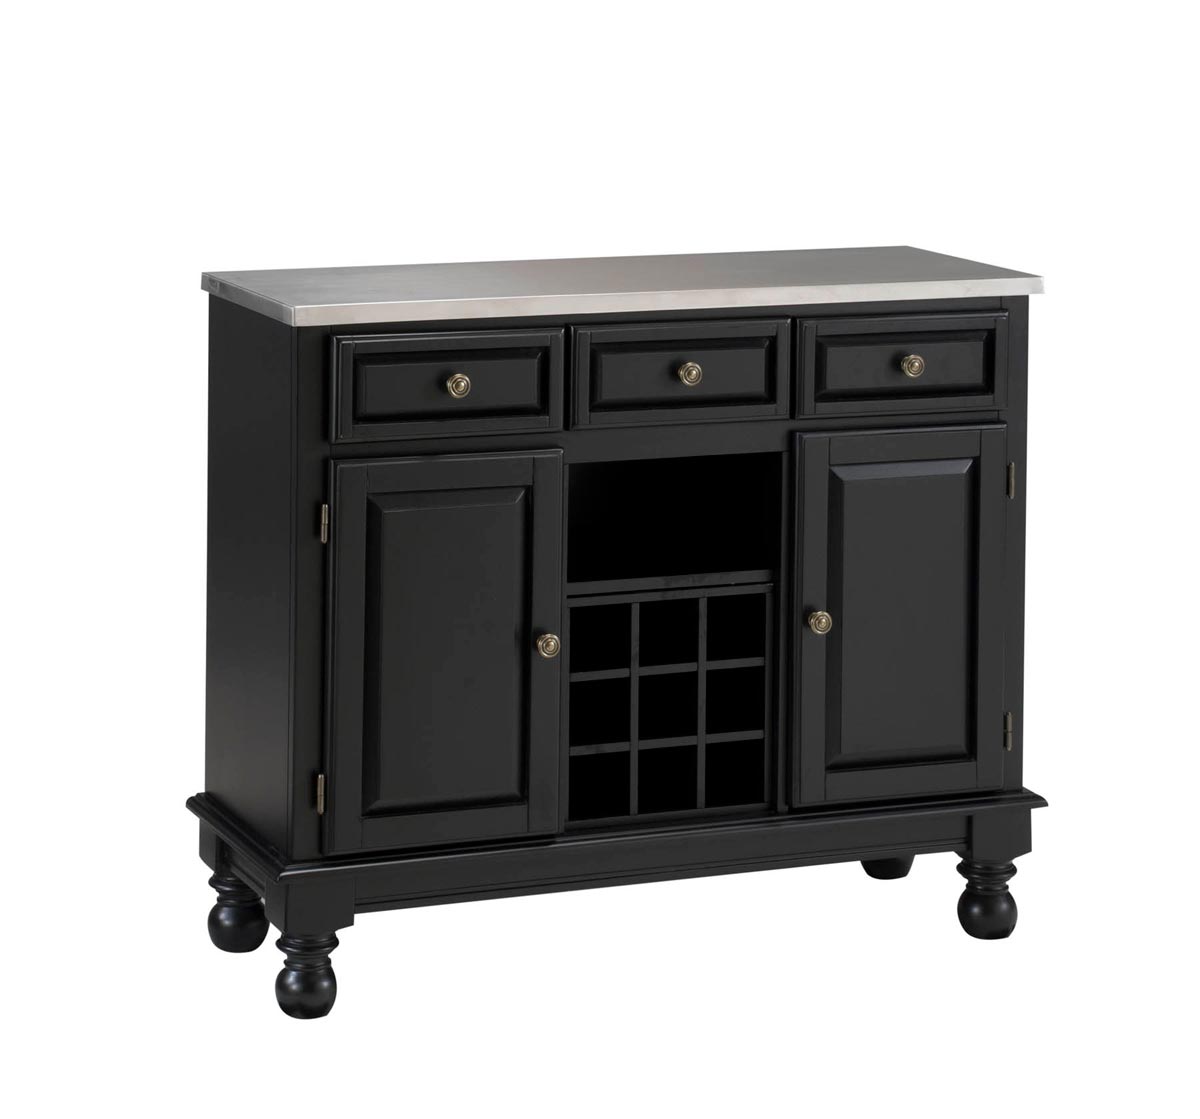 Home Styles Premium Buffet with Stainless Top - Black